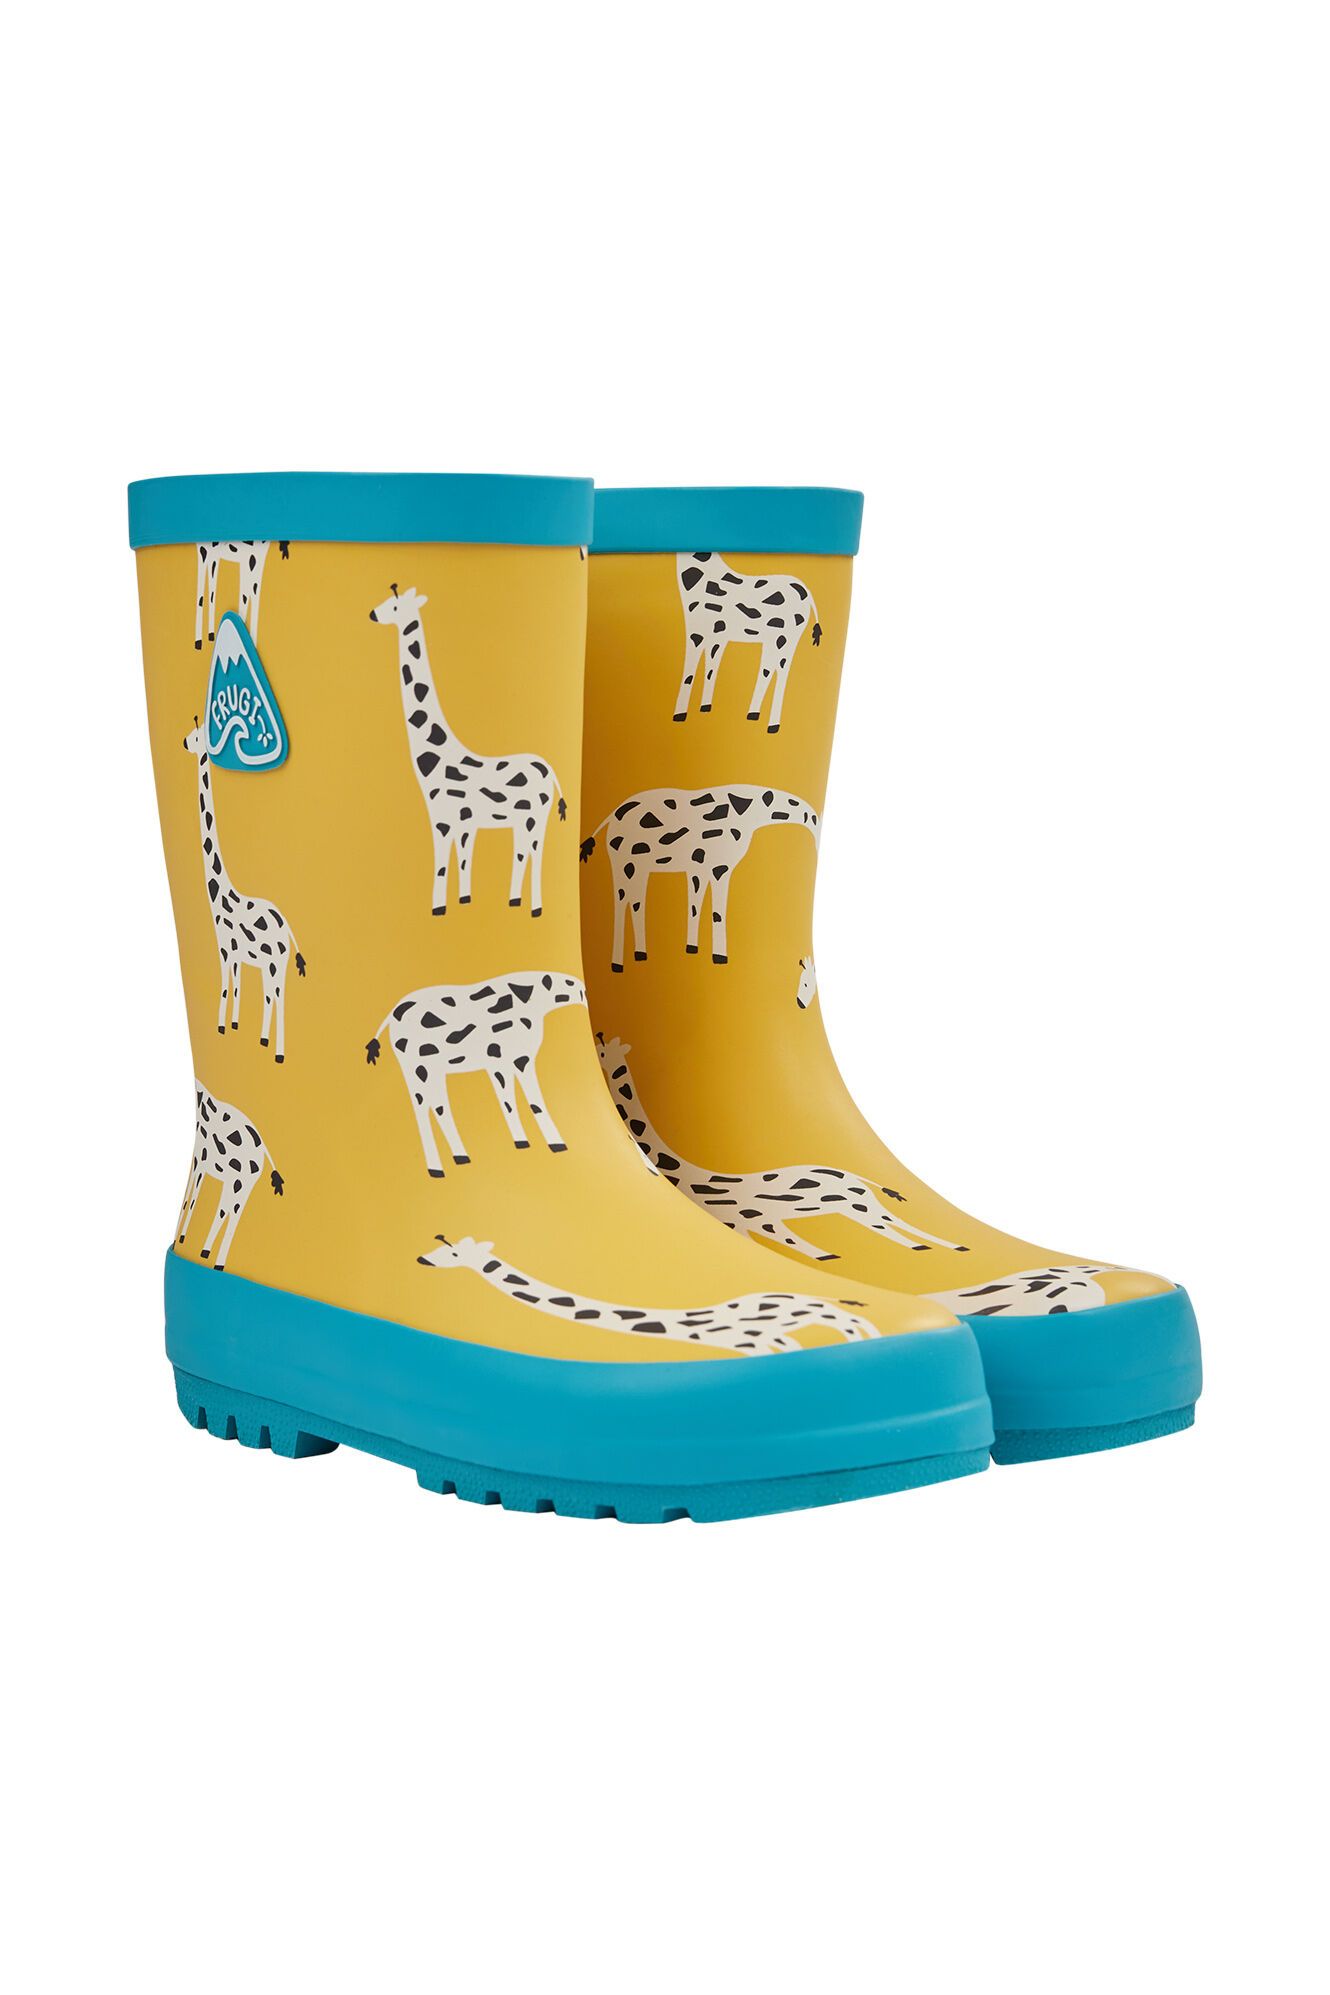 Puddle Buster Wellington Boots